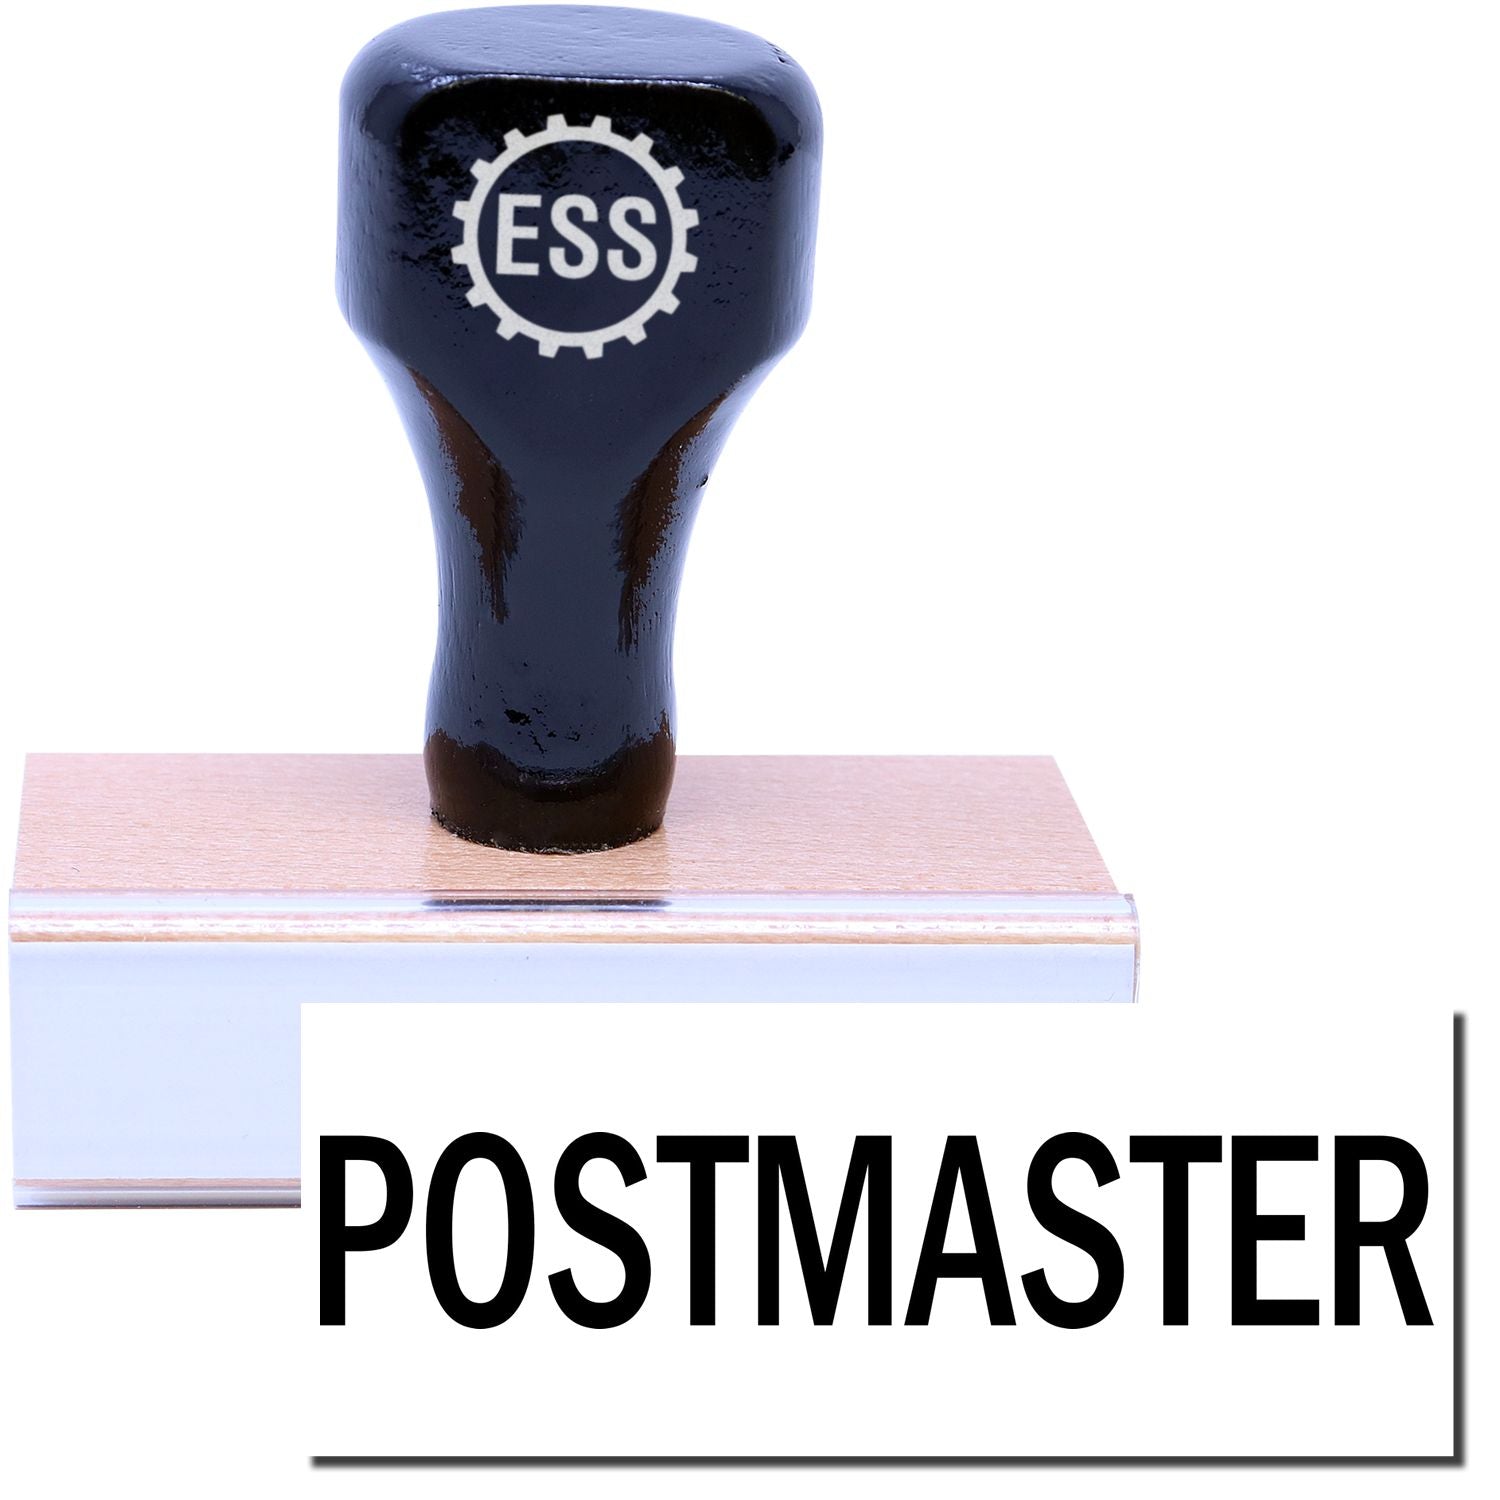 A stock office rubber stamp with a stamped image showing how the text "POSTMASTER" is displayed after stamping.